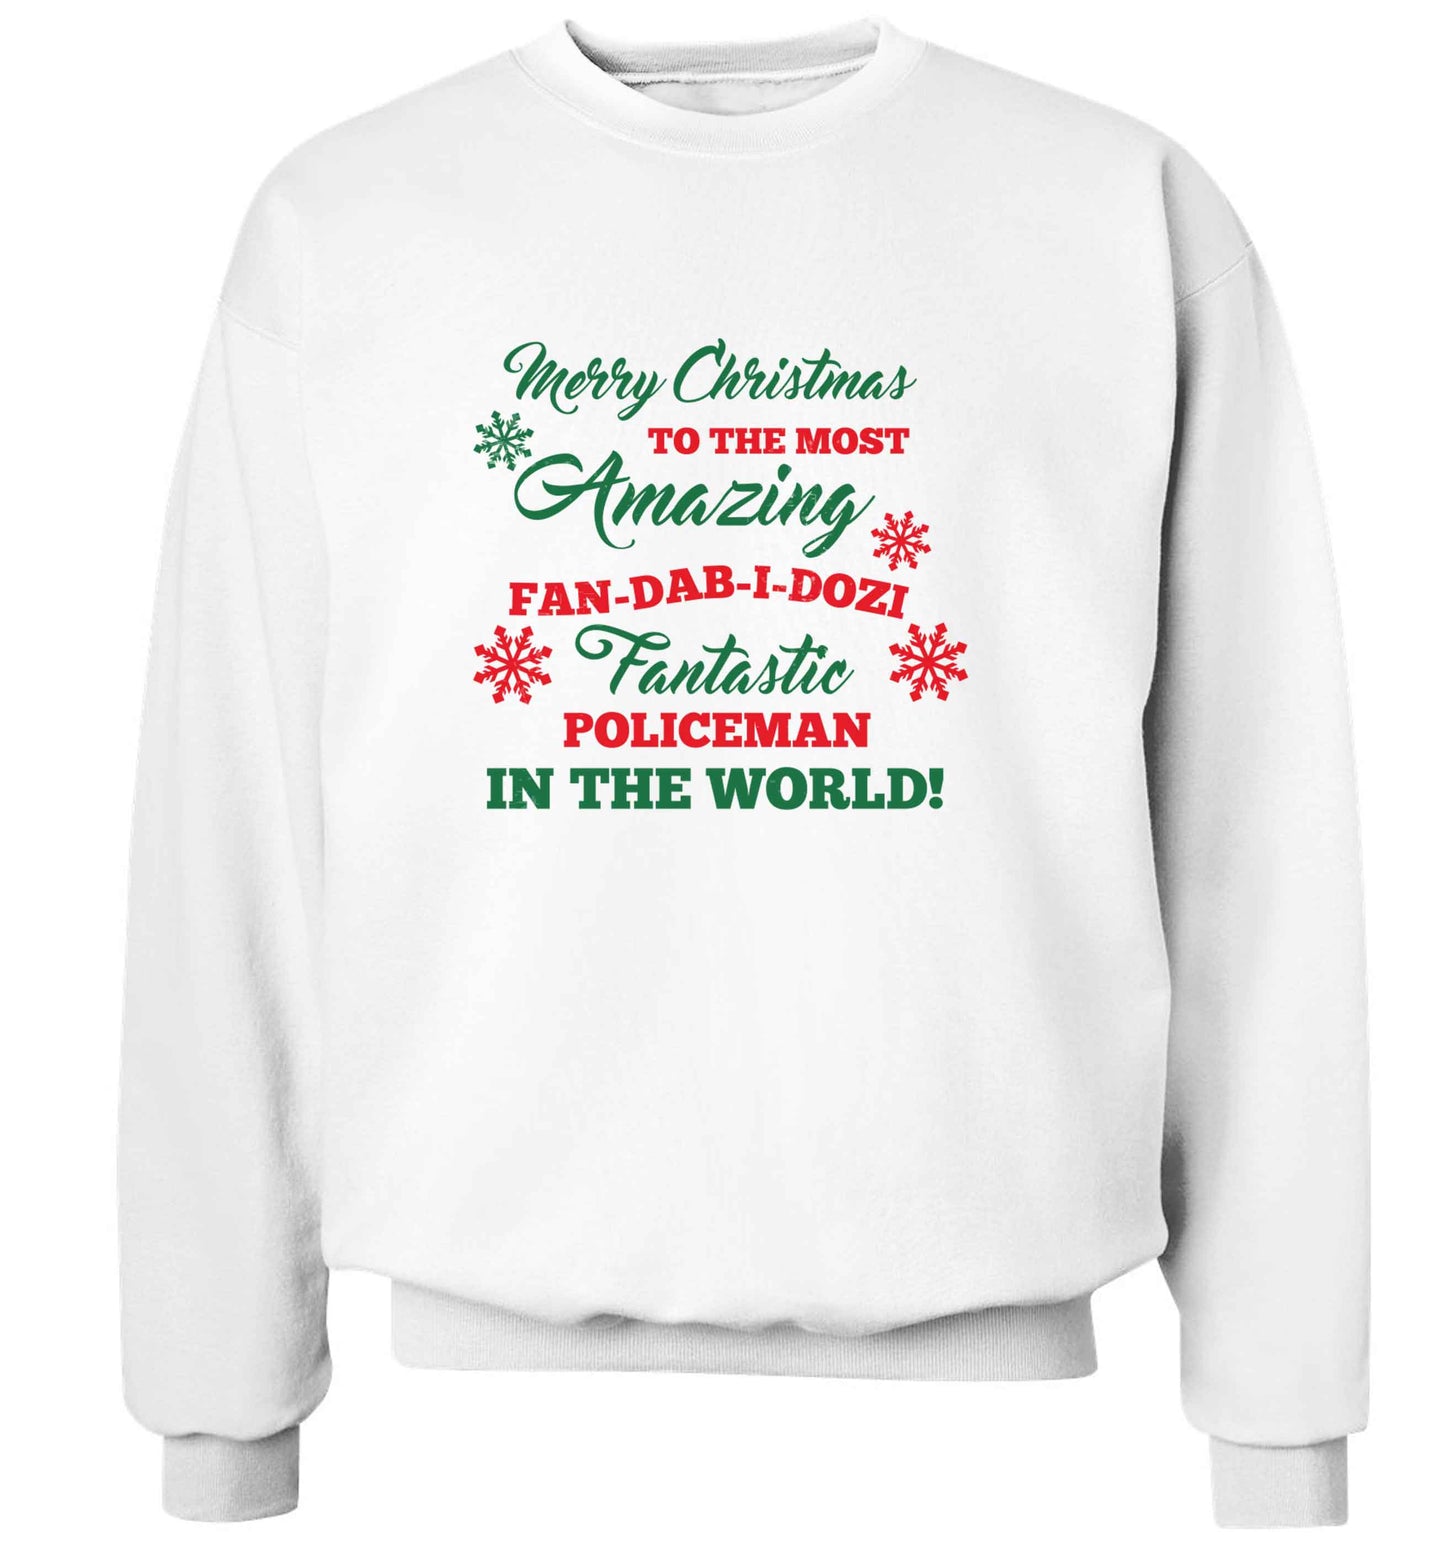 Merry Christmas to the most amazing policeman in the world! adult's unisex white sweater 2XL